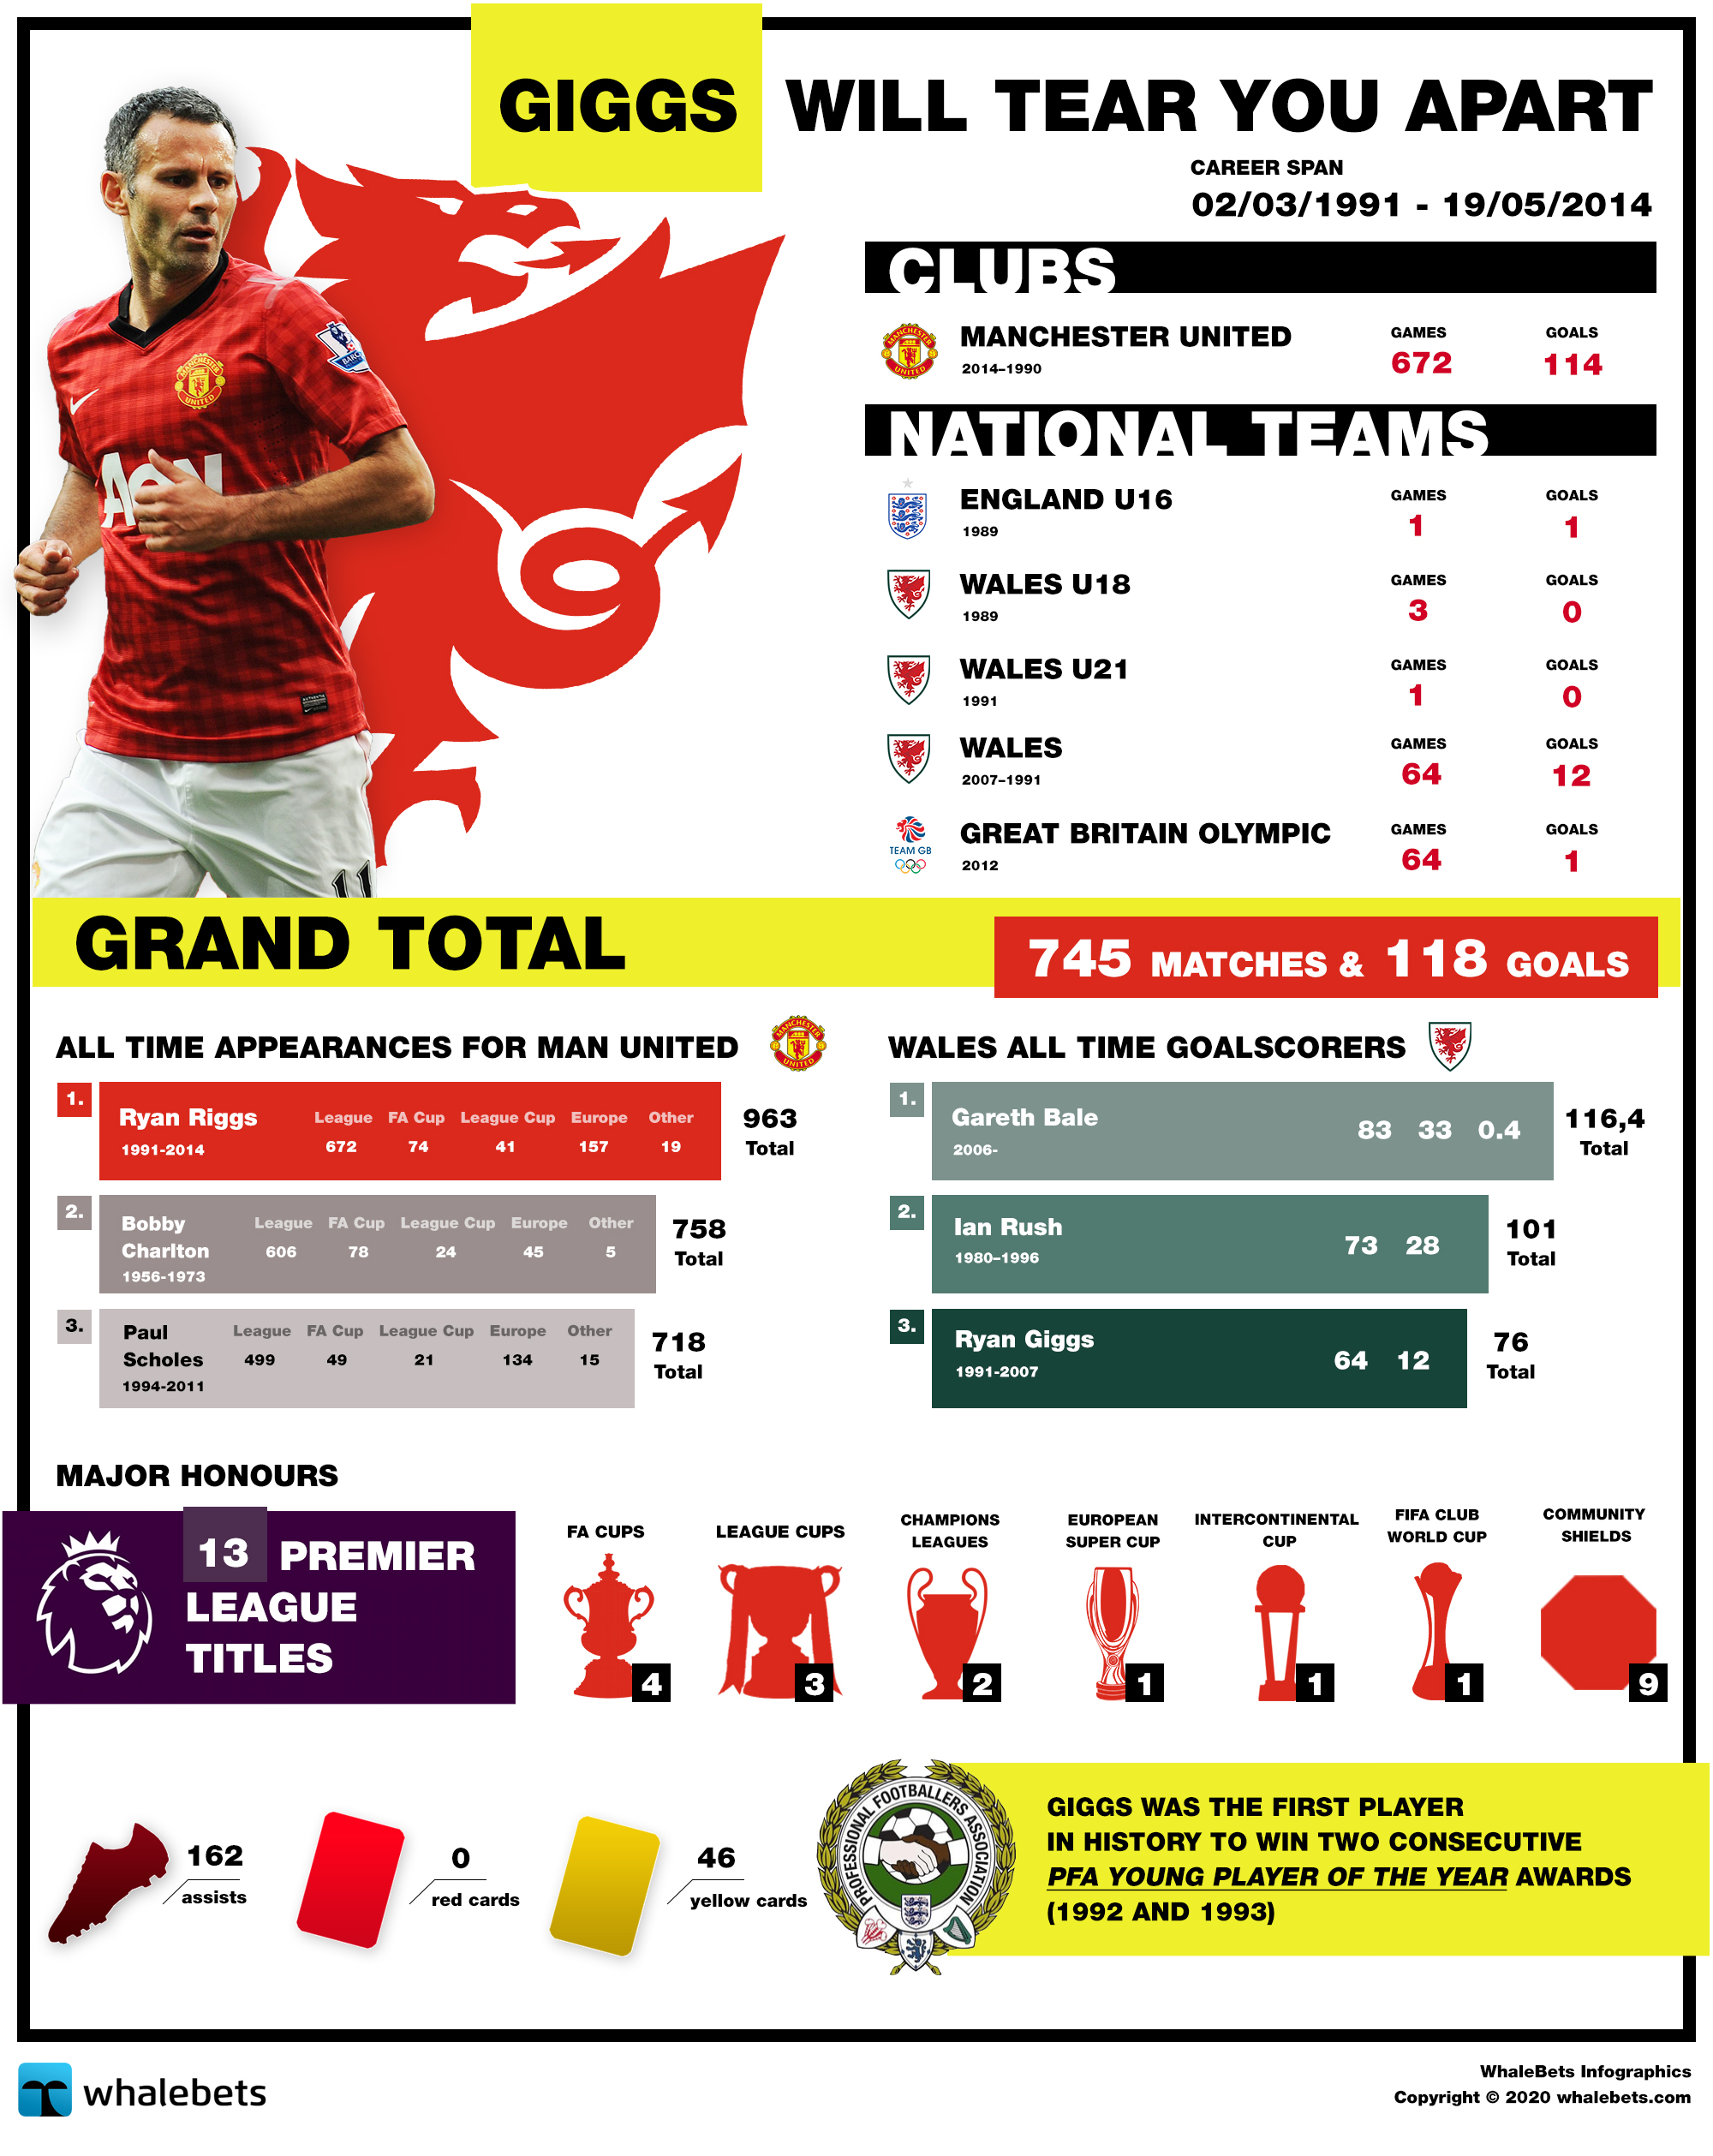 ryan-giggs-will-tear-nfographic